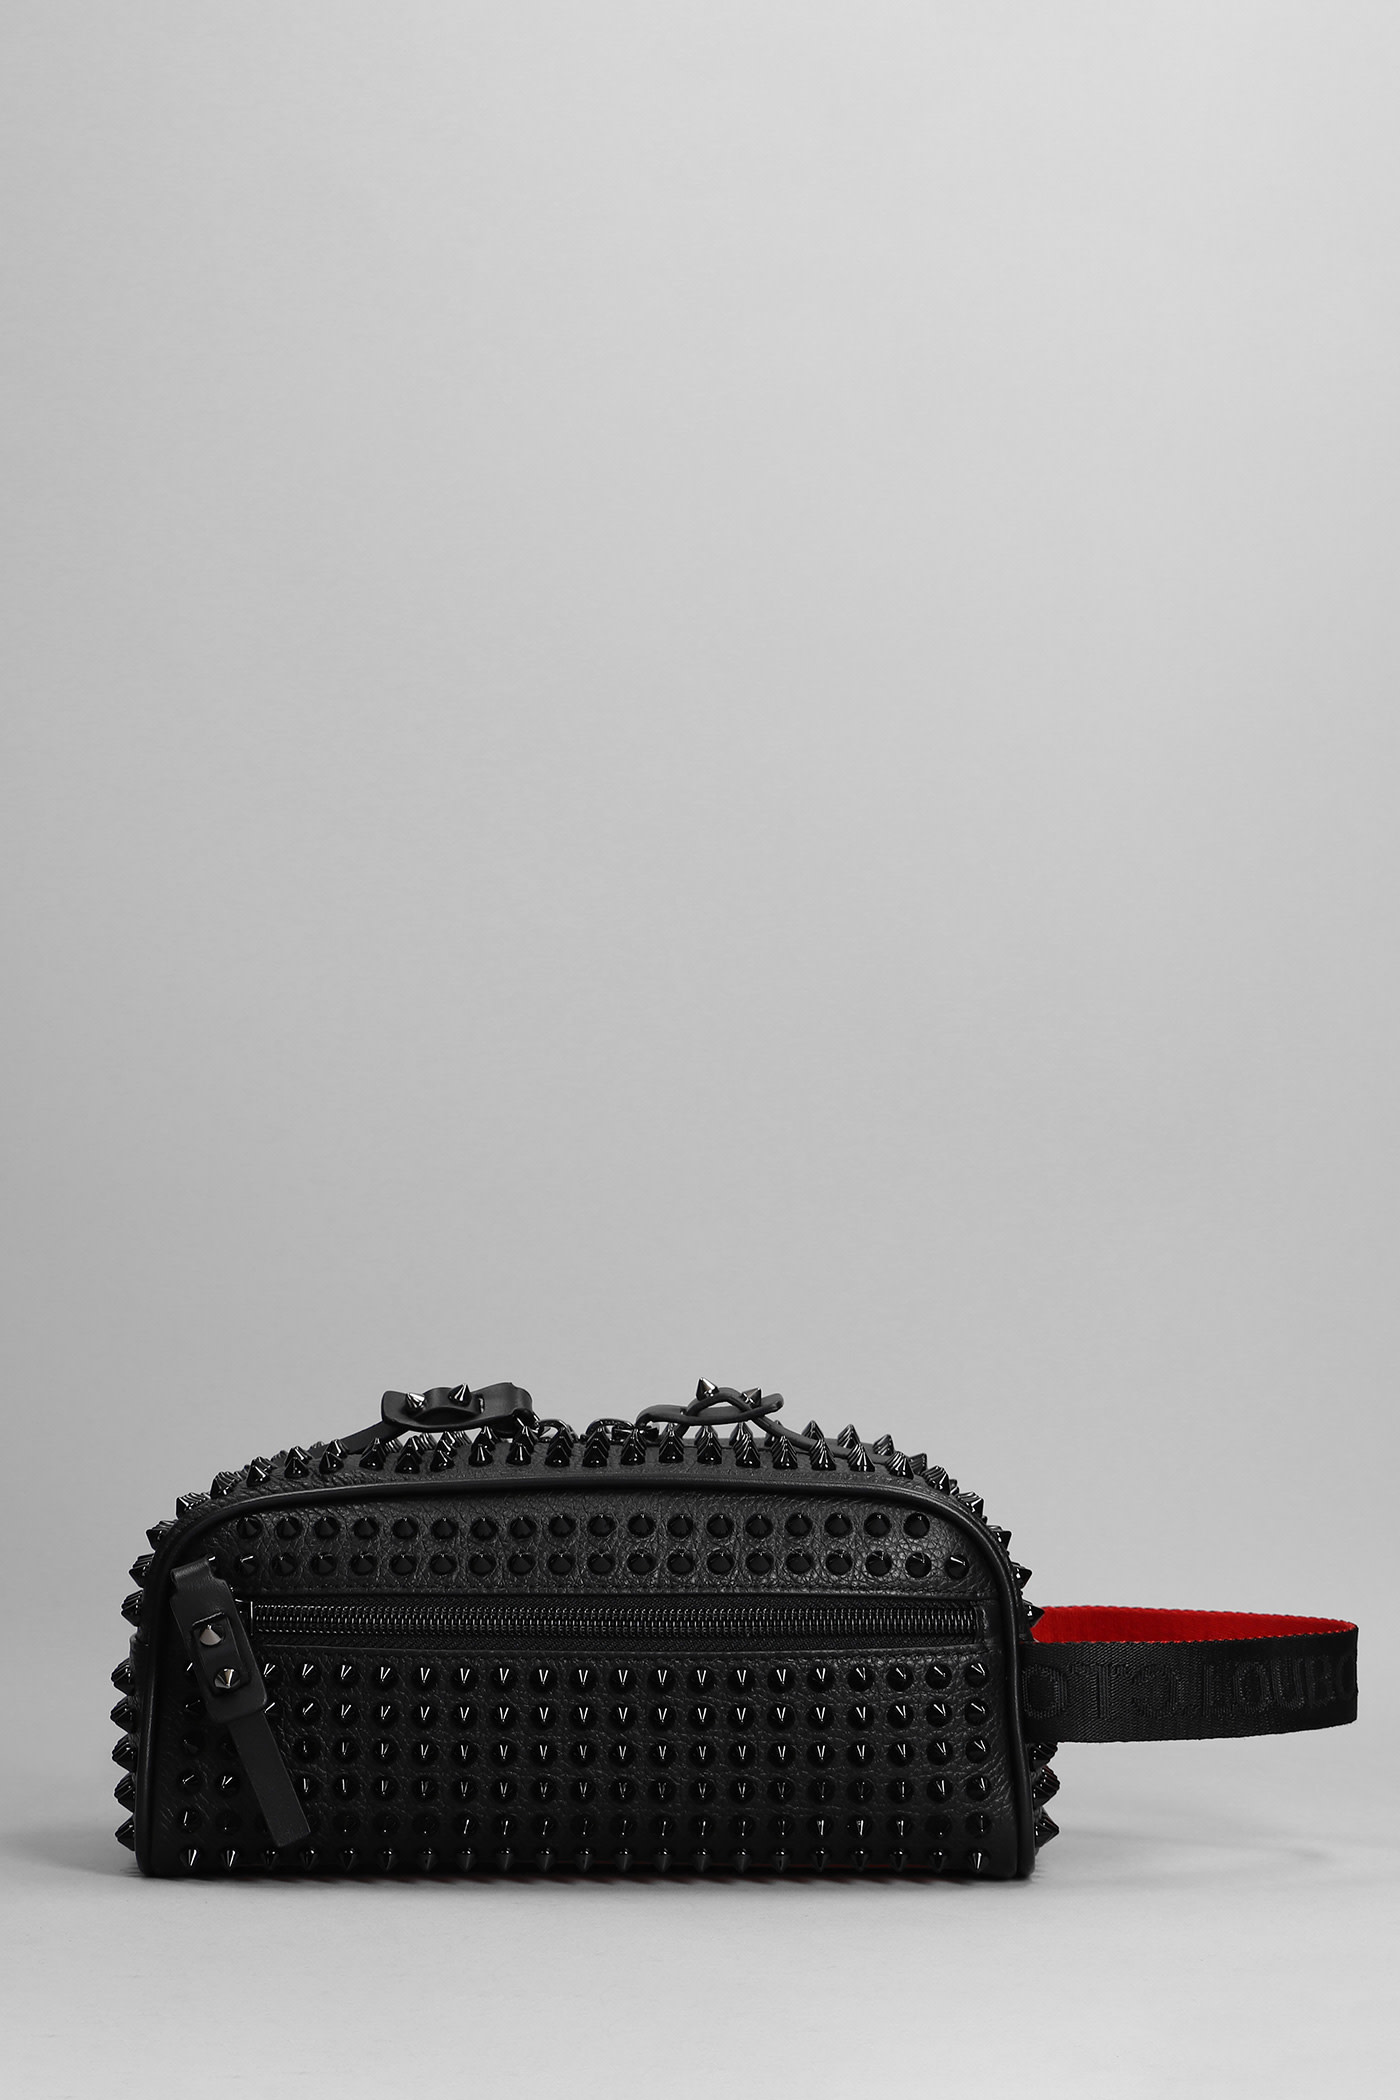 CHRISTIAN LOUBOUTIN BLASTER CLUTCH IN BLACK LEATHER